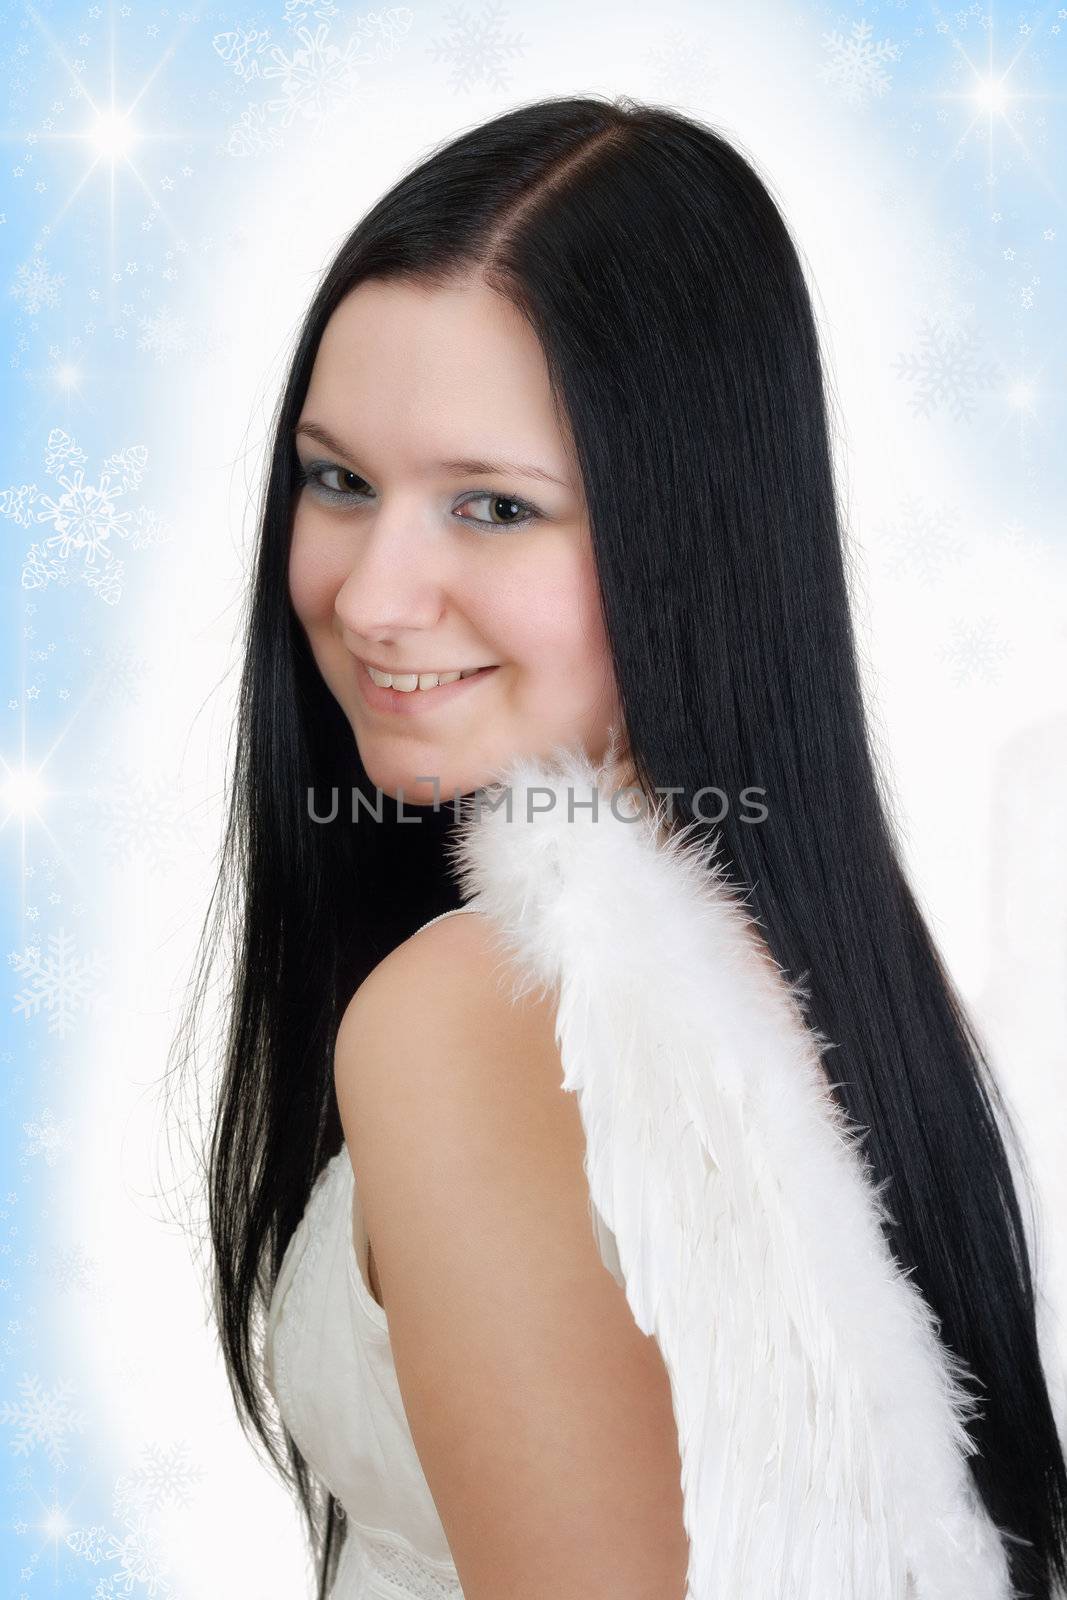 innocence christmas angel with black hair and wings on white blue background with stars and snow looking shy